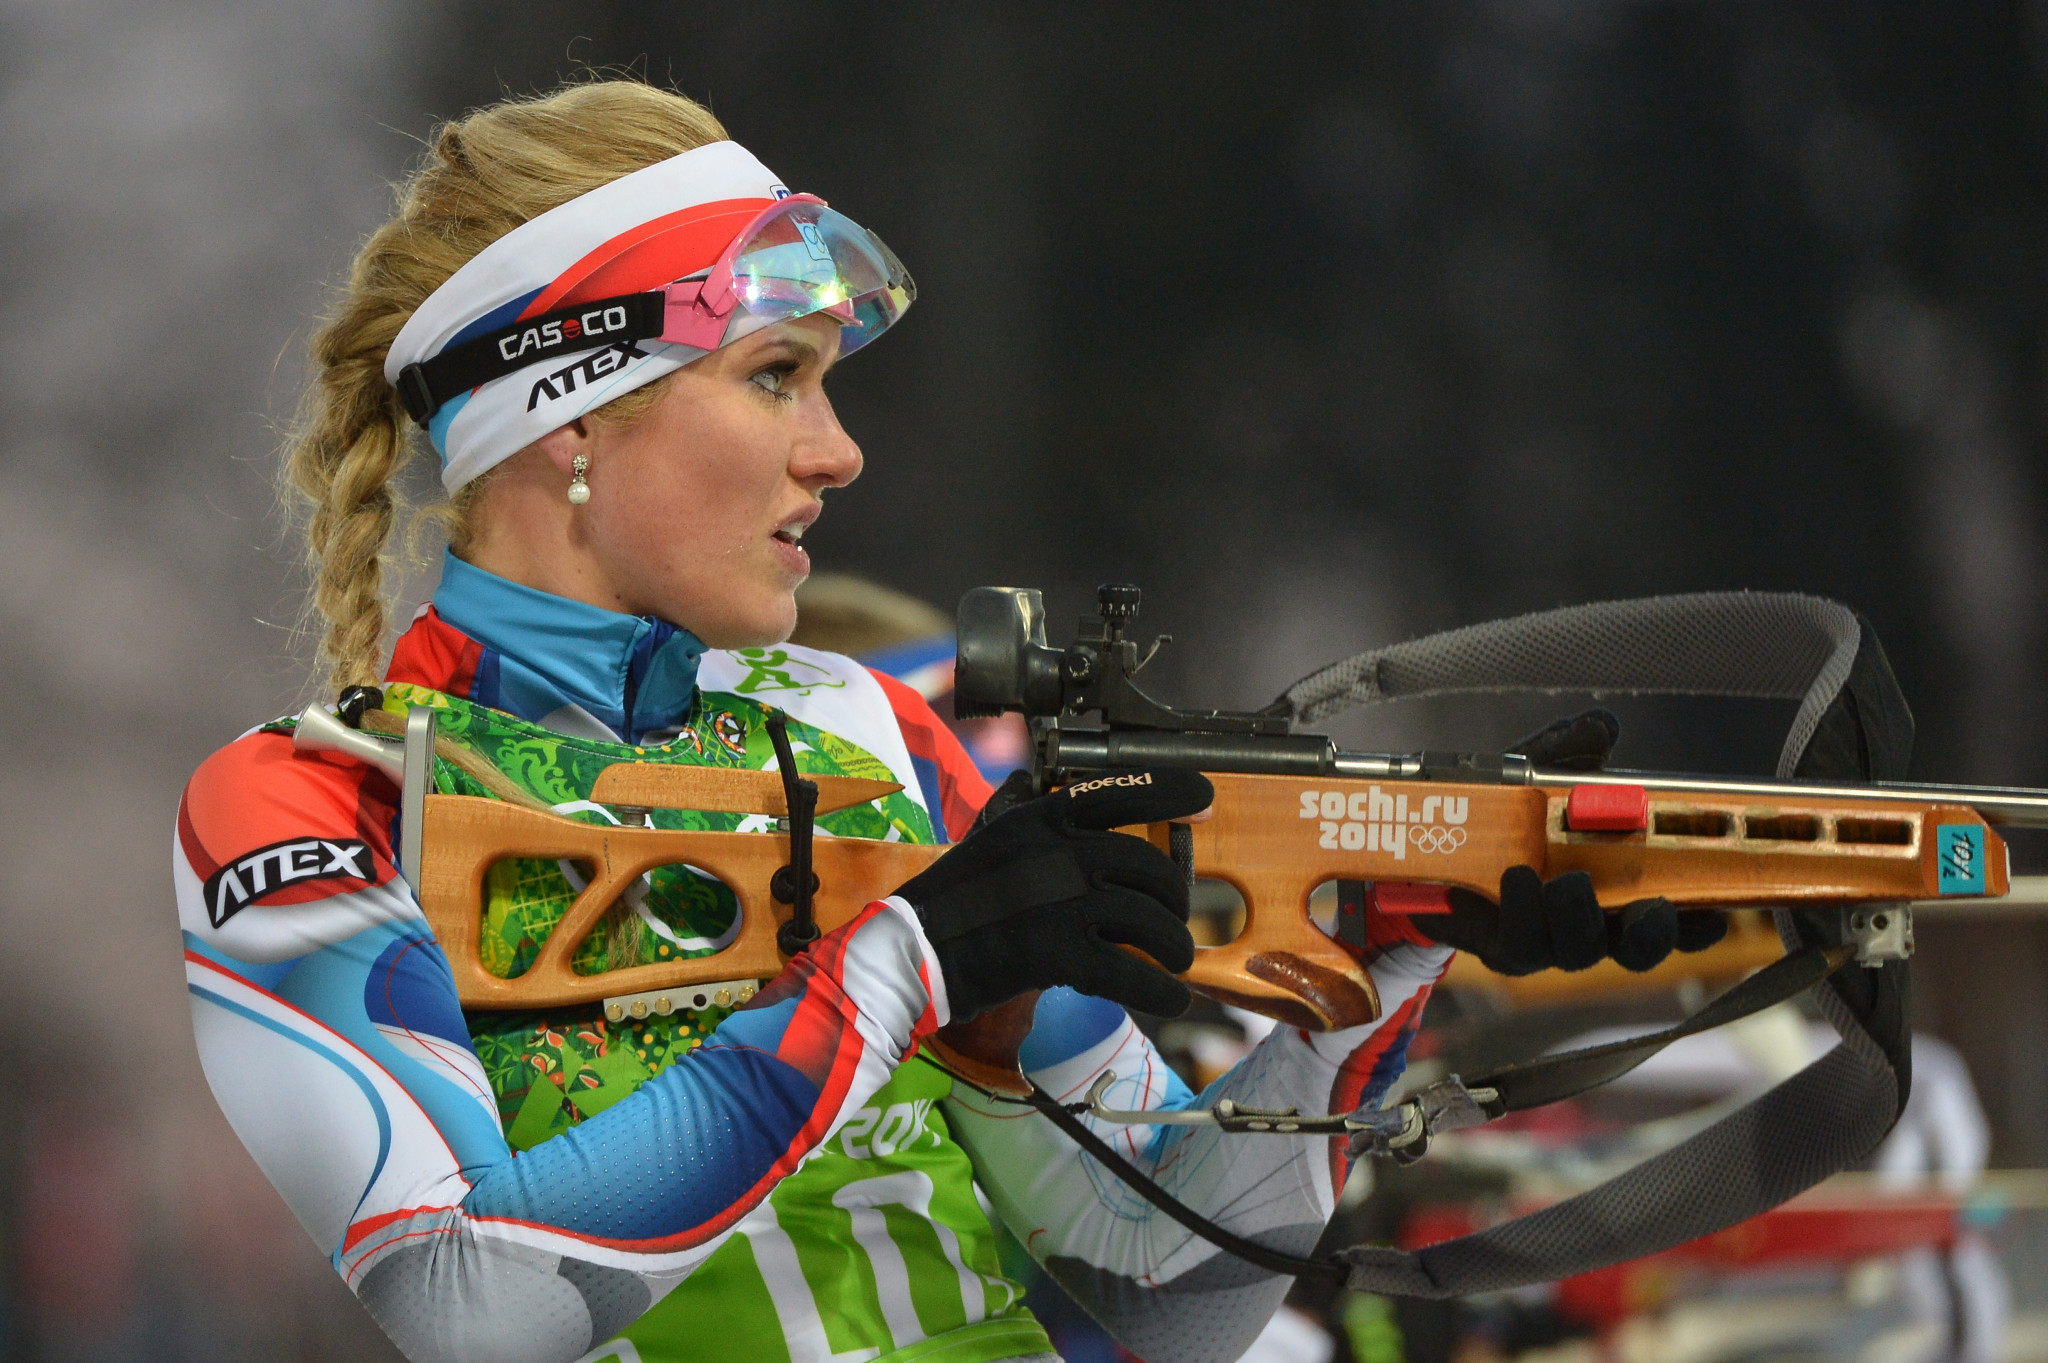 Czech Republic to finally receive Sochi 2014 biathlon medals reallocated after Russian doping